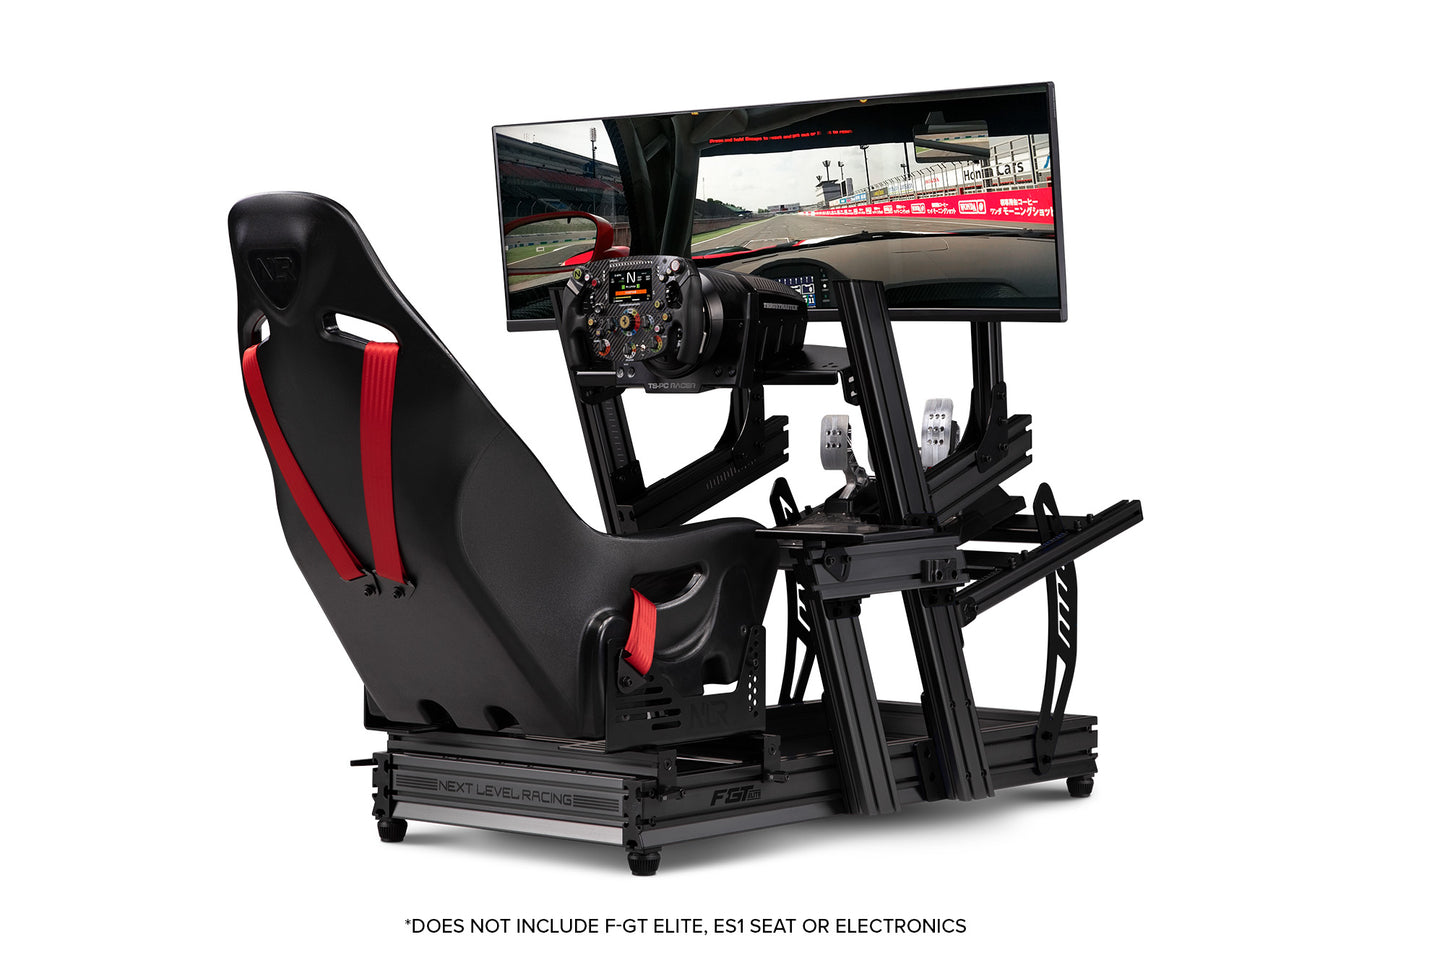 Next Level Racing F-GT Elite Cockpit Mount Monitor Stand - Carbon Grey